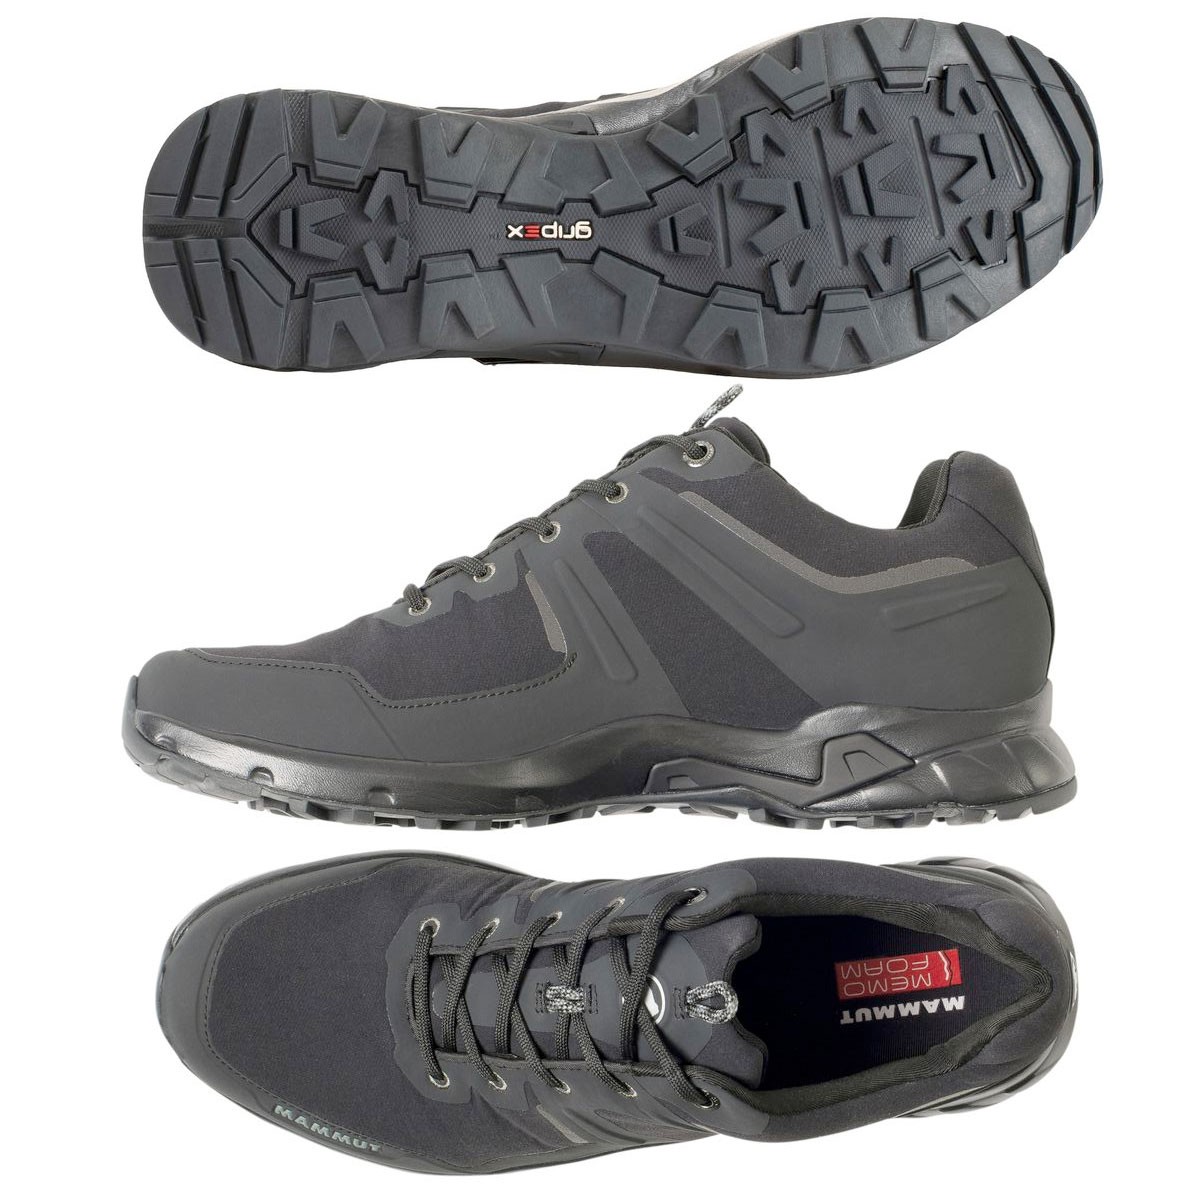 Technologies used in the Mammut Ultimate Pro Low Gore-Tex - photo 2